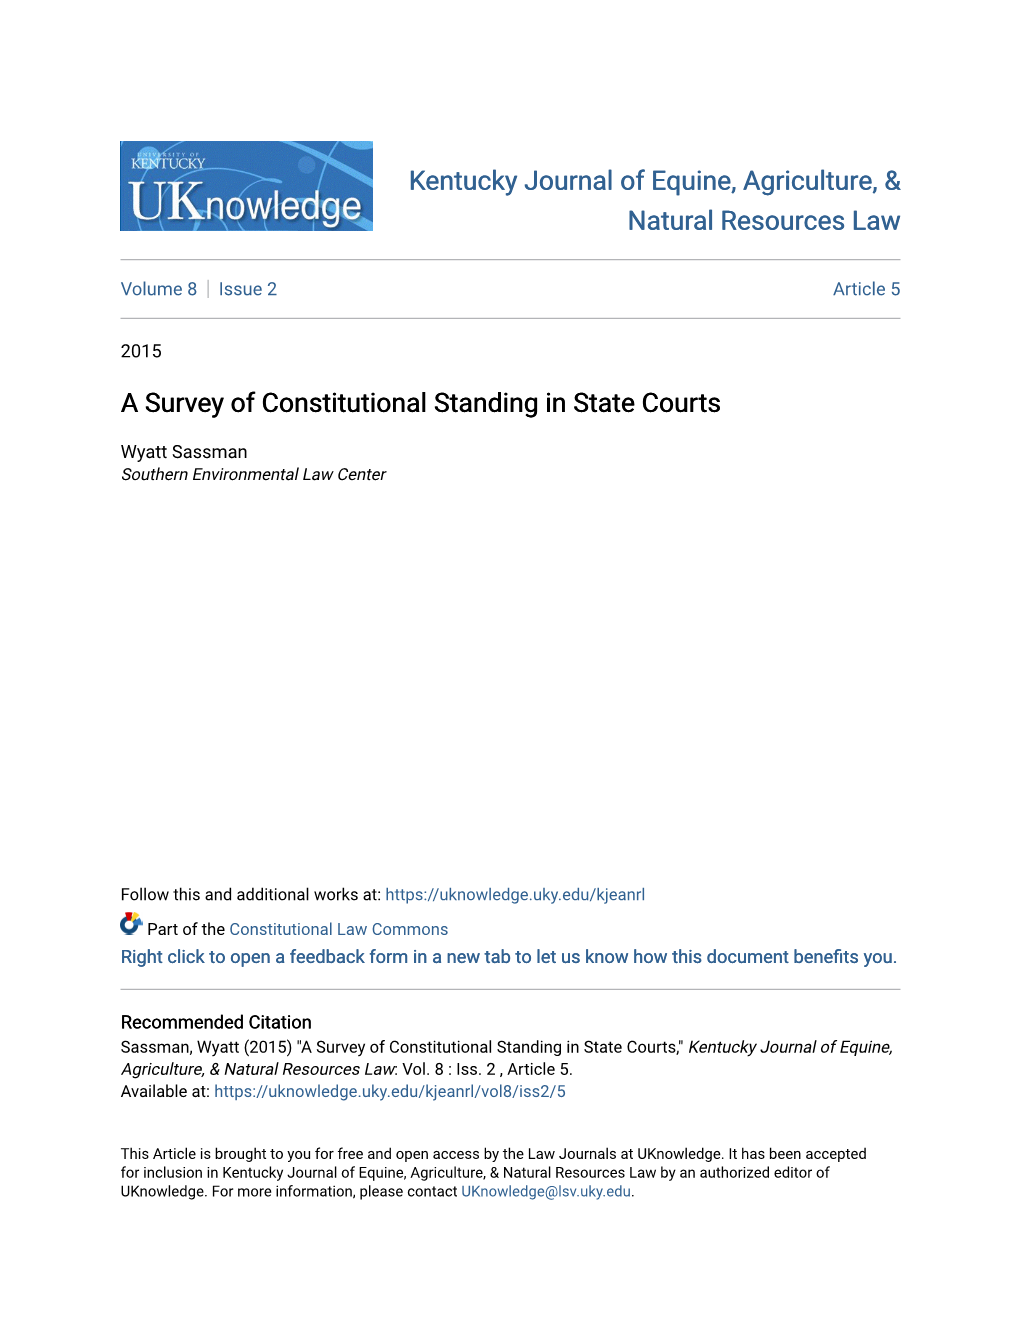 A Survey of Constitutional Standing in State Courts